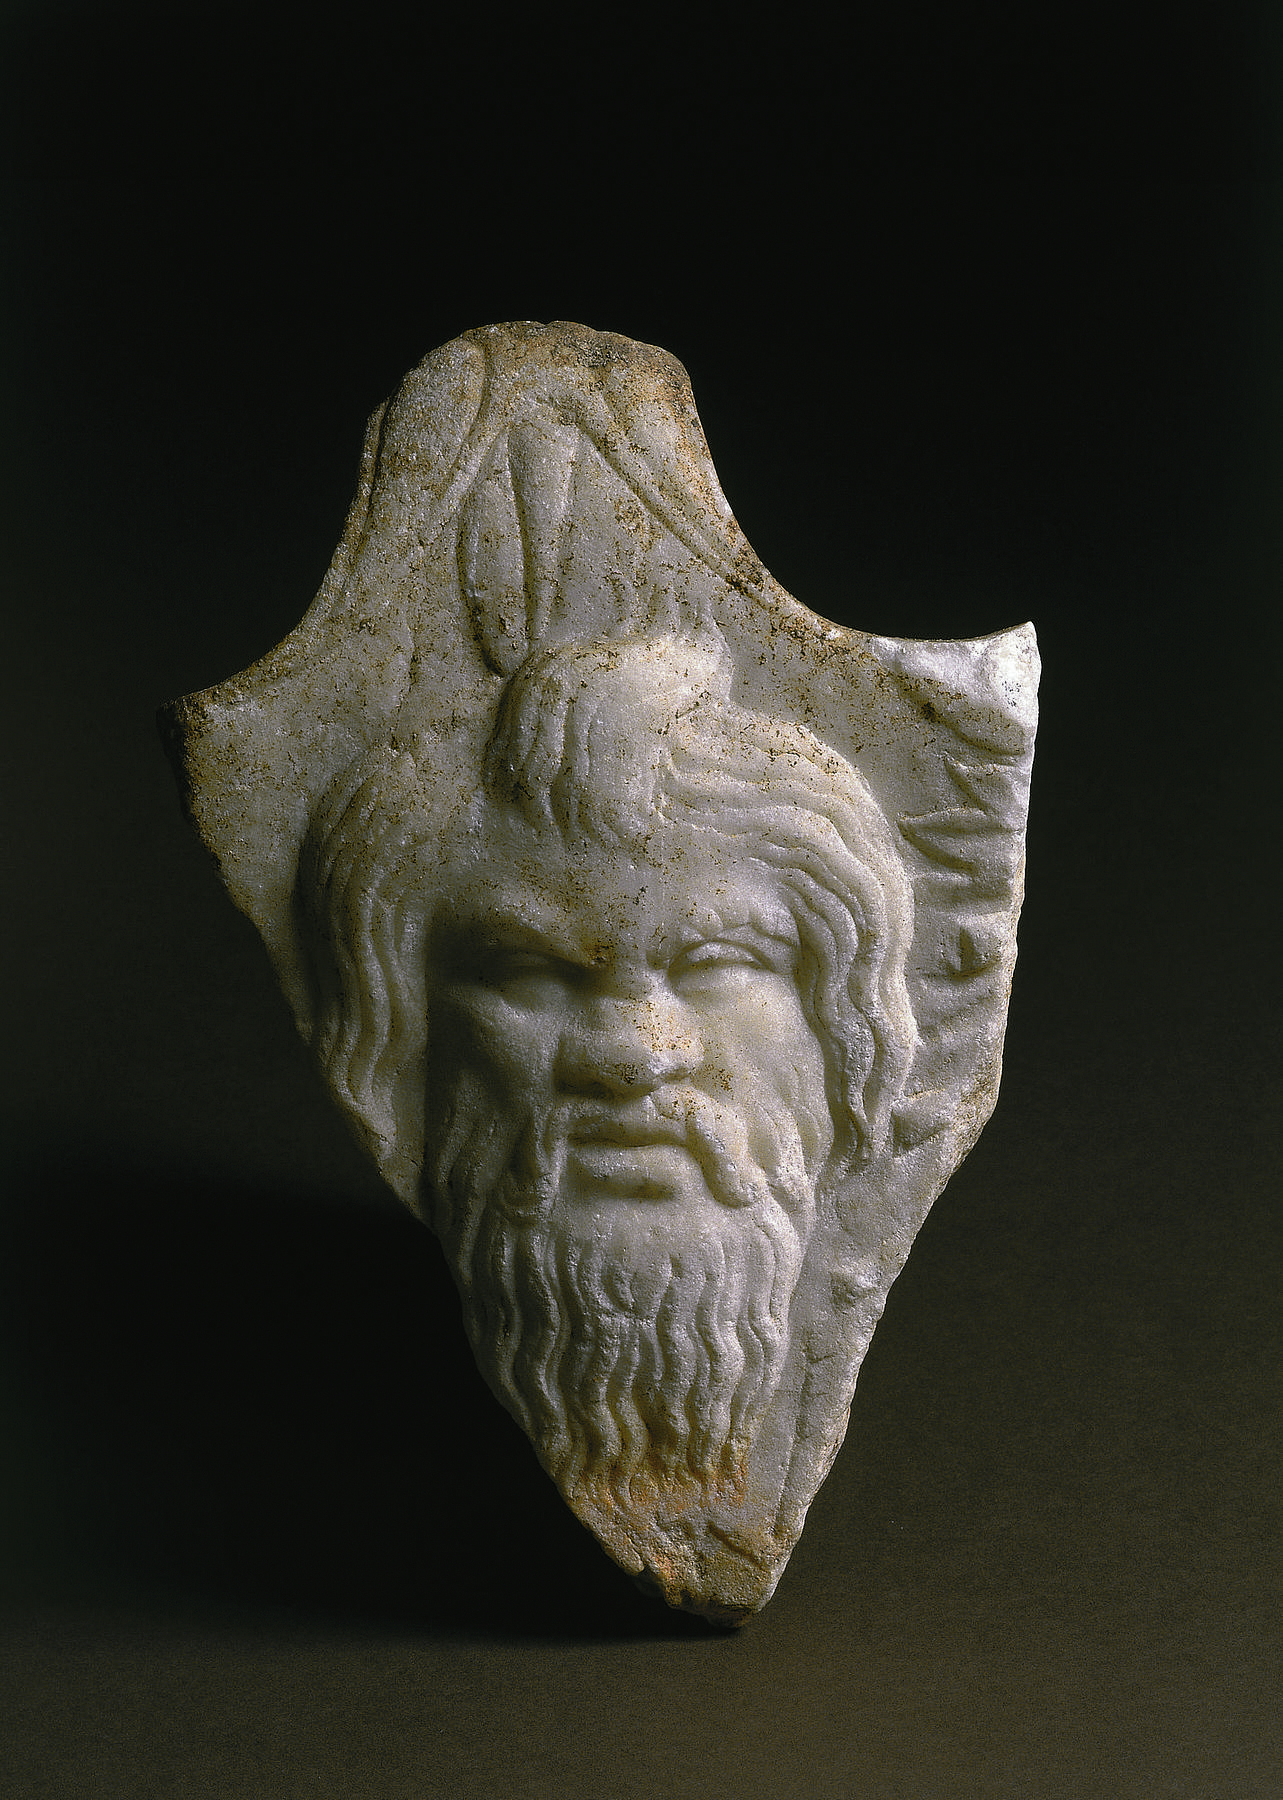 Lamp with a silenus mask in relief, H1485